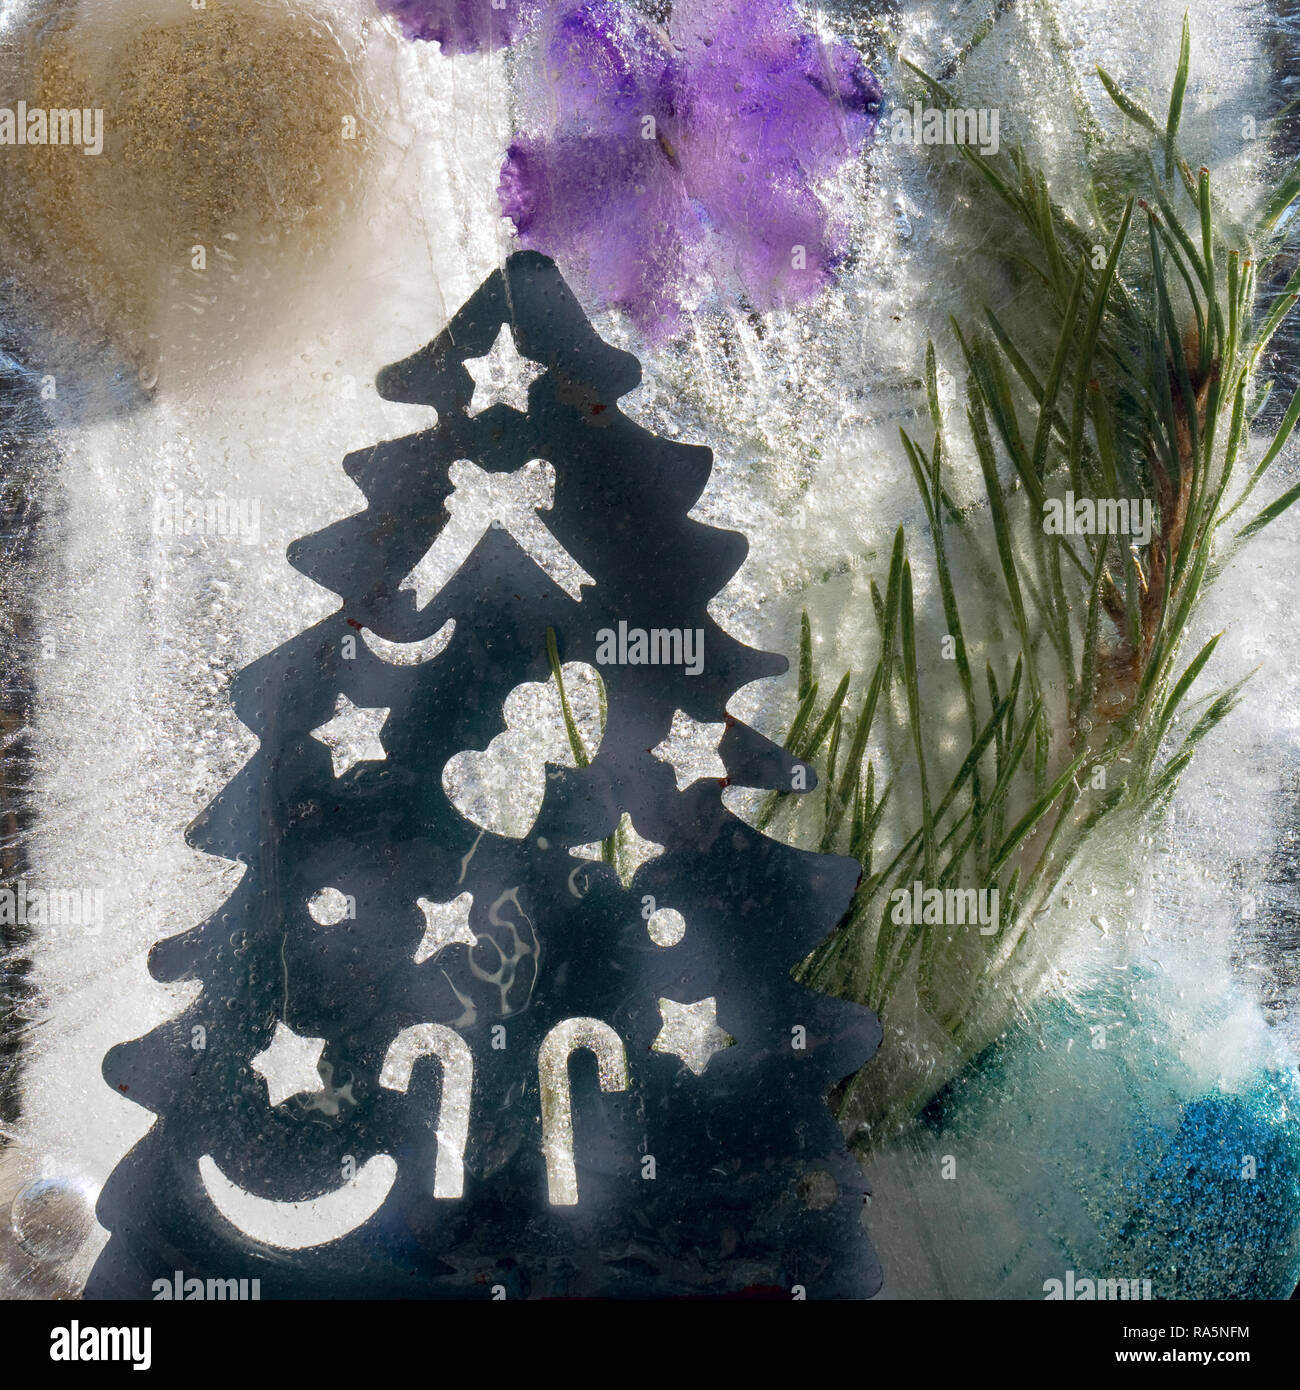 Background of   blue violet flower, blue and gold ball, blue Christmas fir  tree and twig of fir tree  in ice   cube with air bubbles.Happy new year 2 Stock Photo